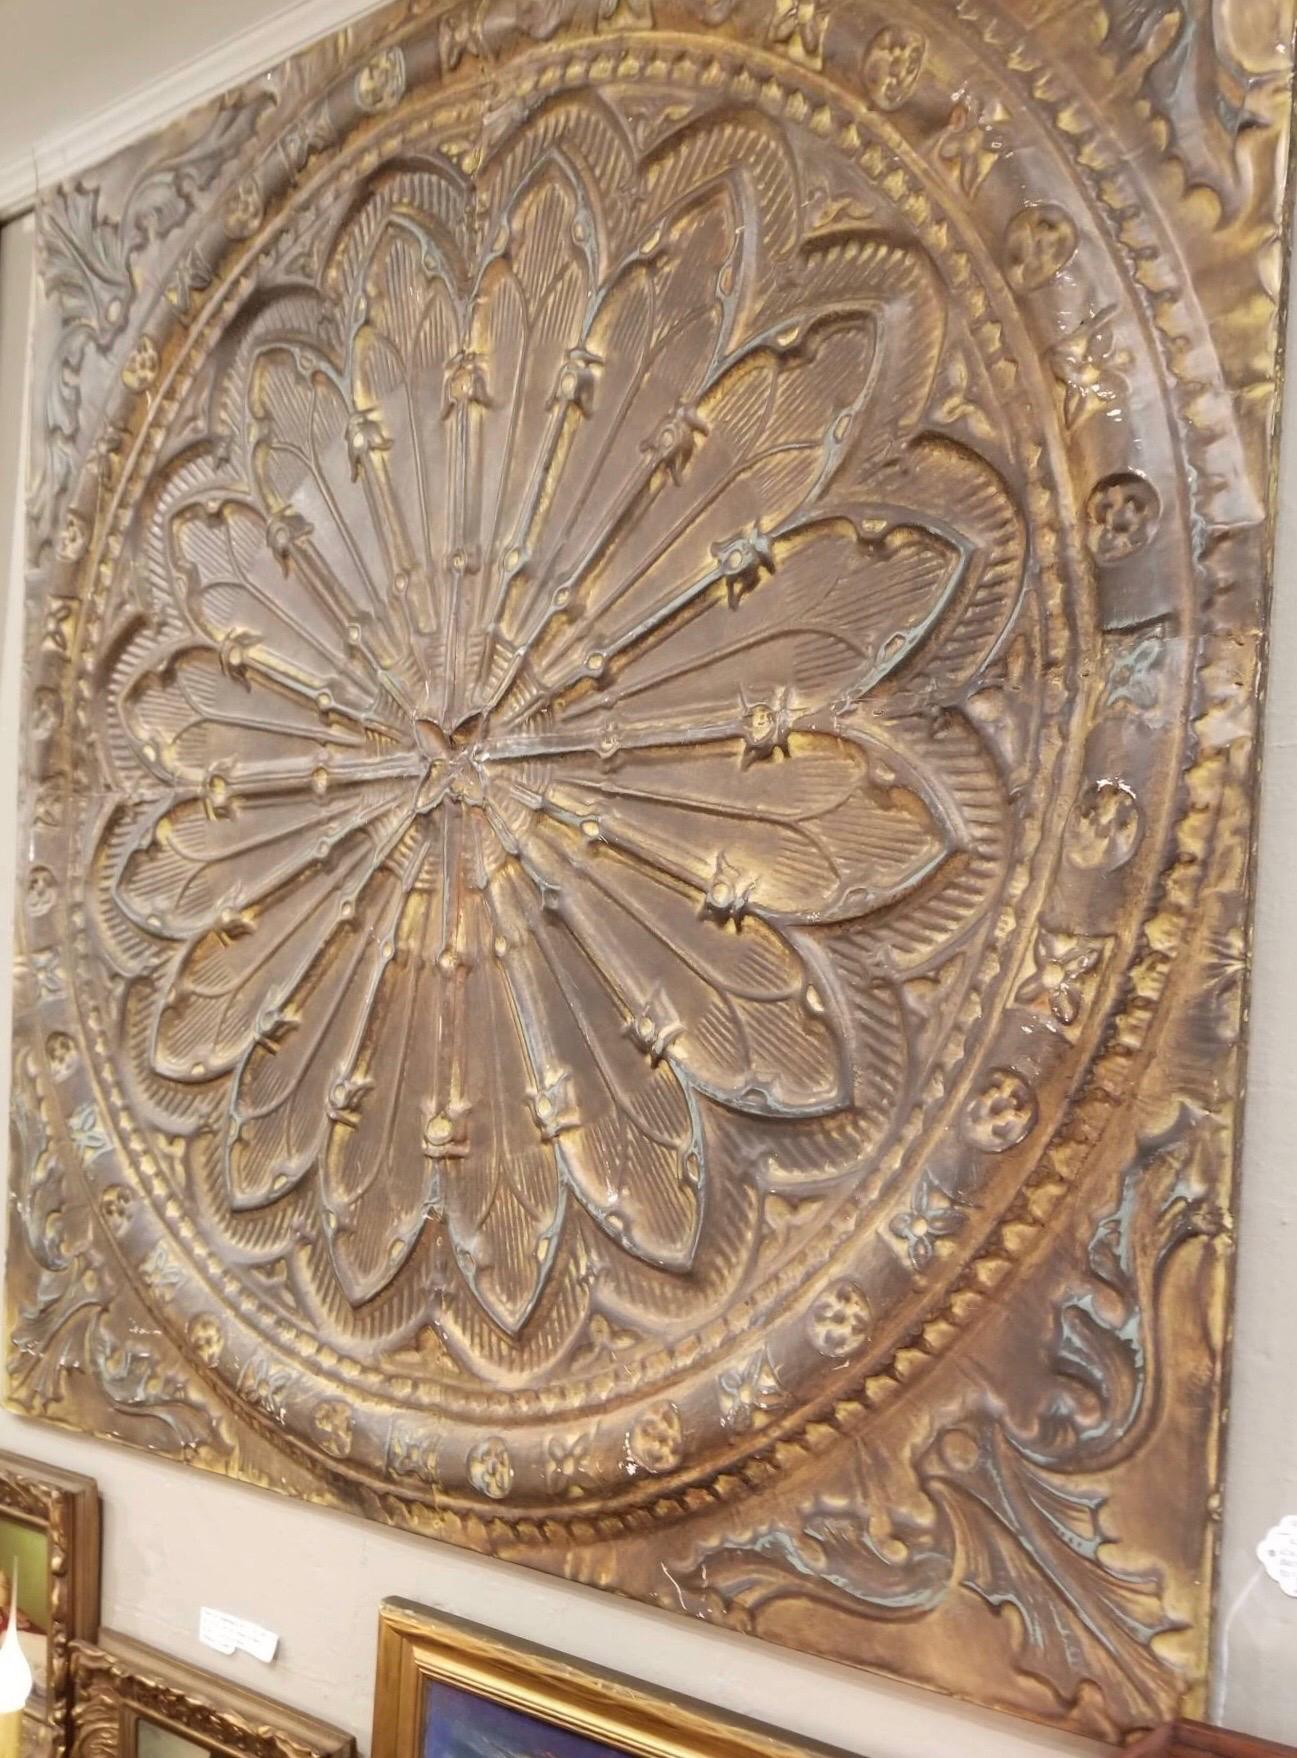 Monumental Architectural Ceiling Tile, Provenance a Philly Library, circa 1890 2